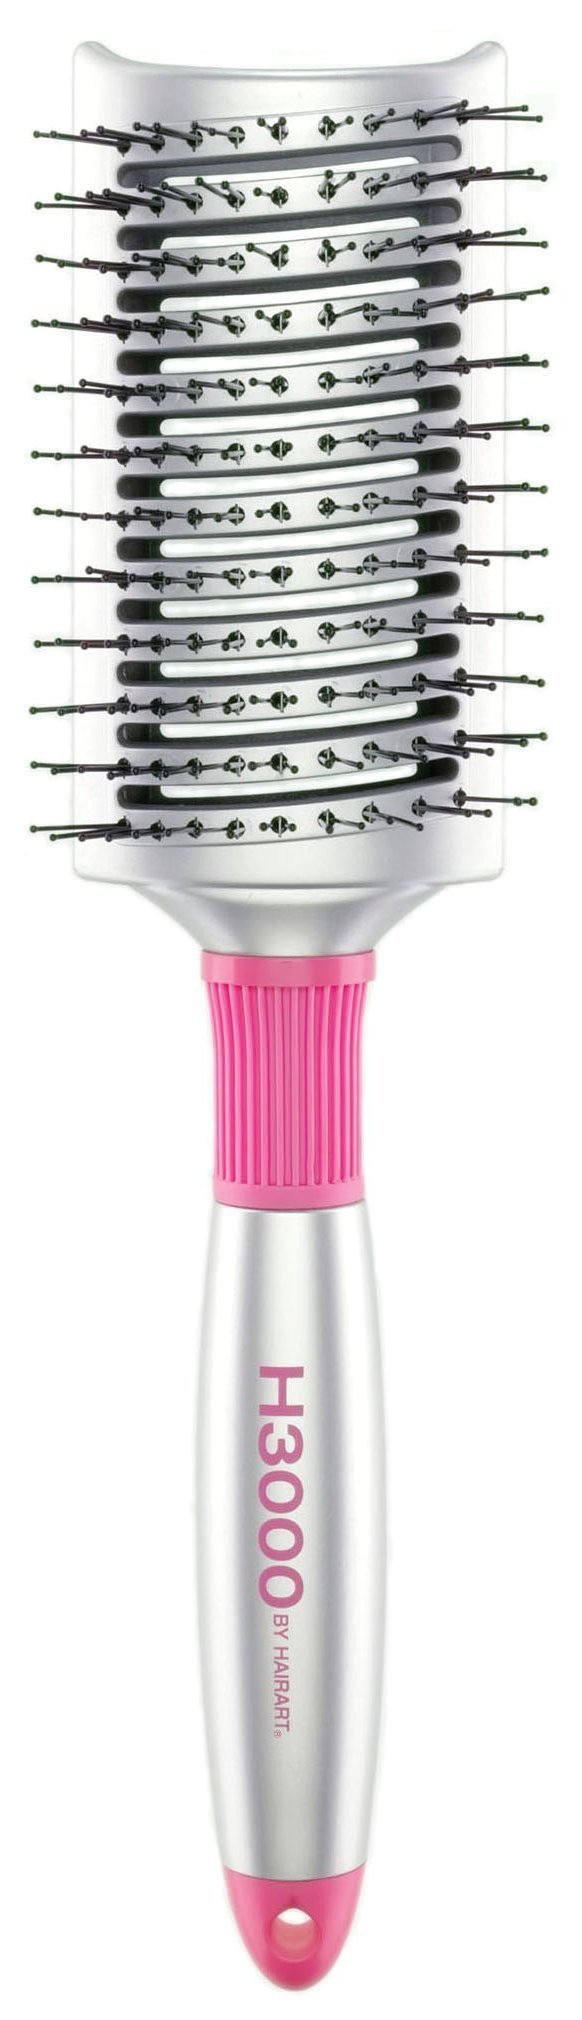 Vent Brush - H3000 Collection HairArt Int'l Inc.